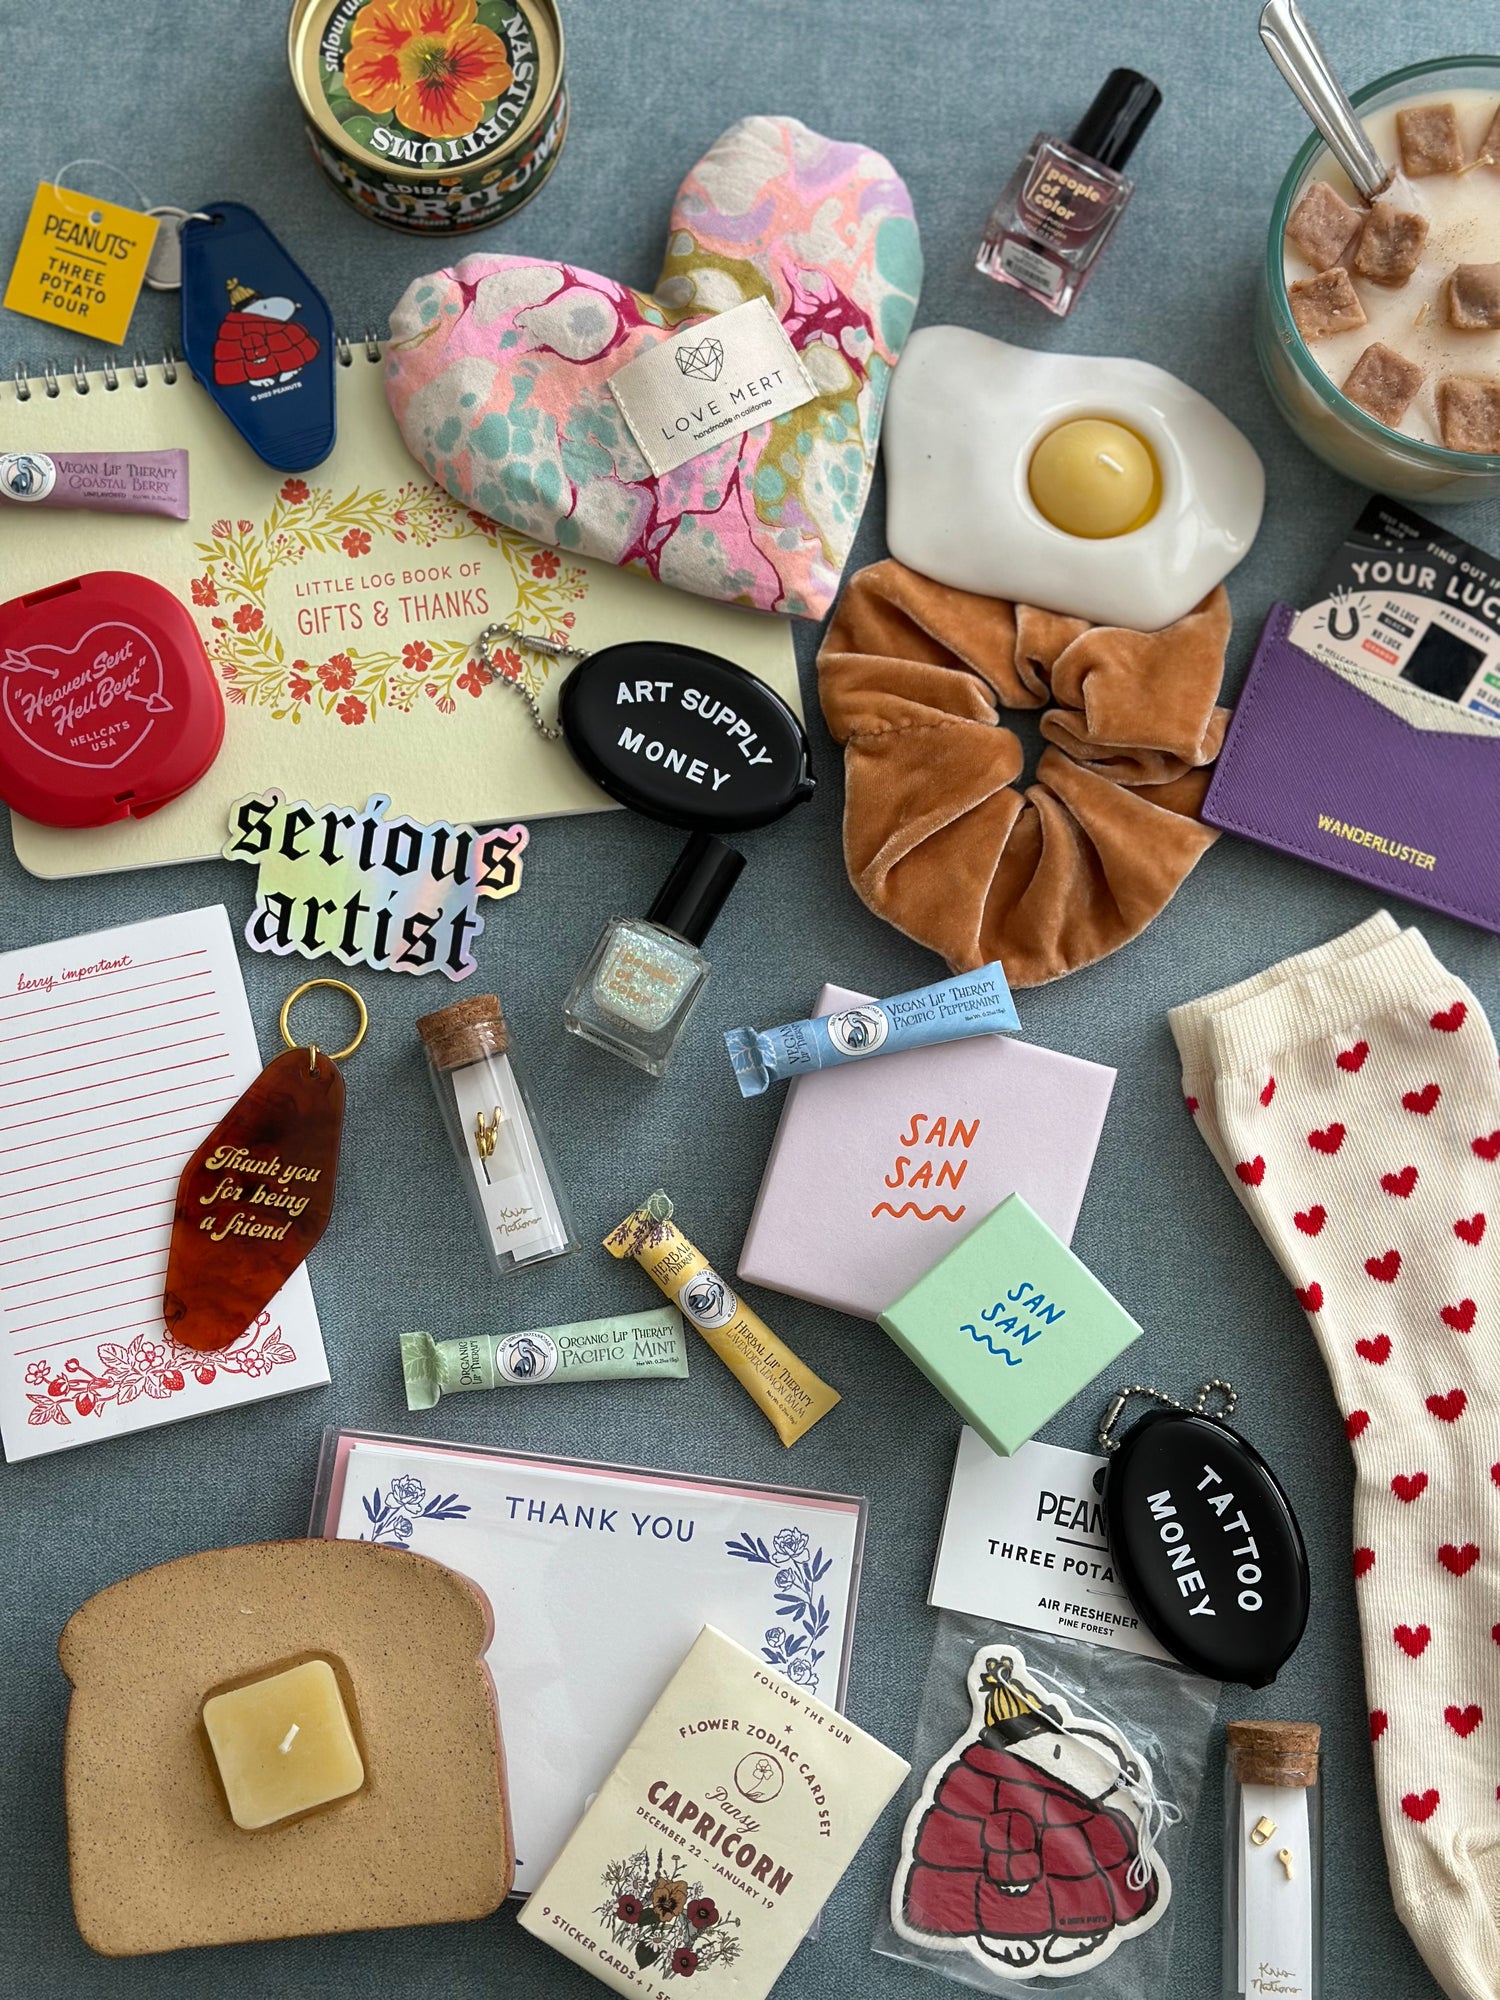 A carefully curated assortment of products made by independent makers & artists, sold by Ruby's